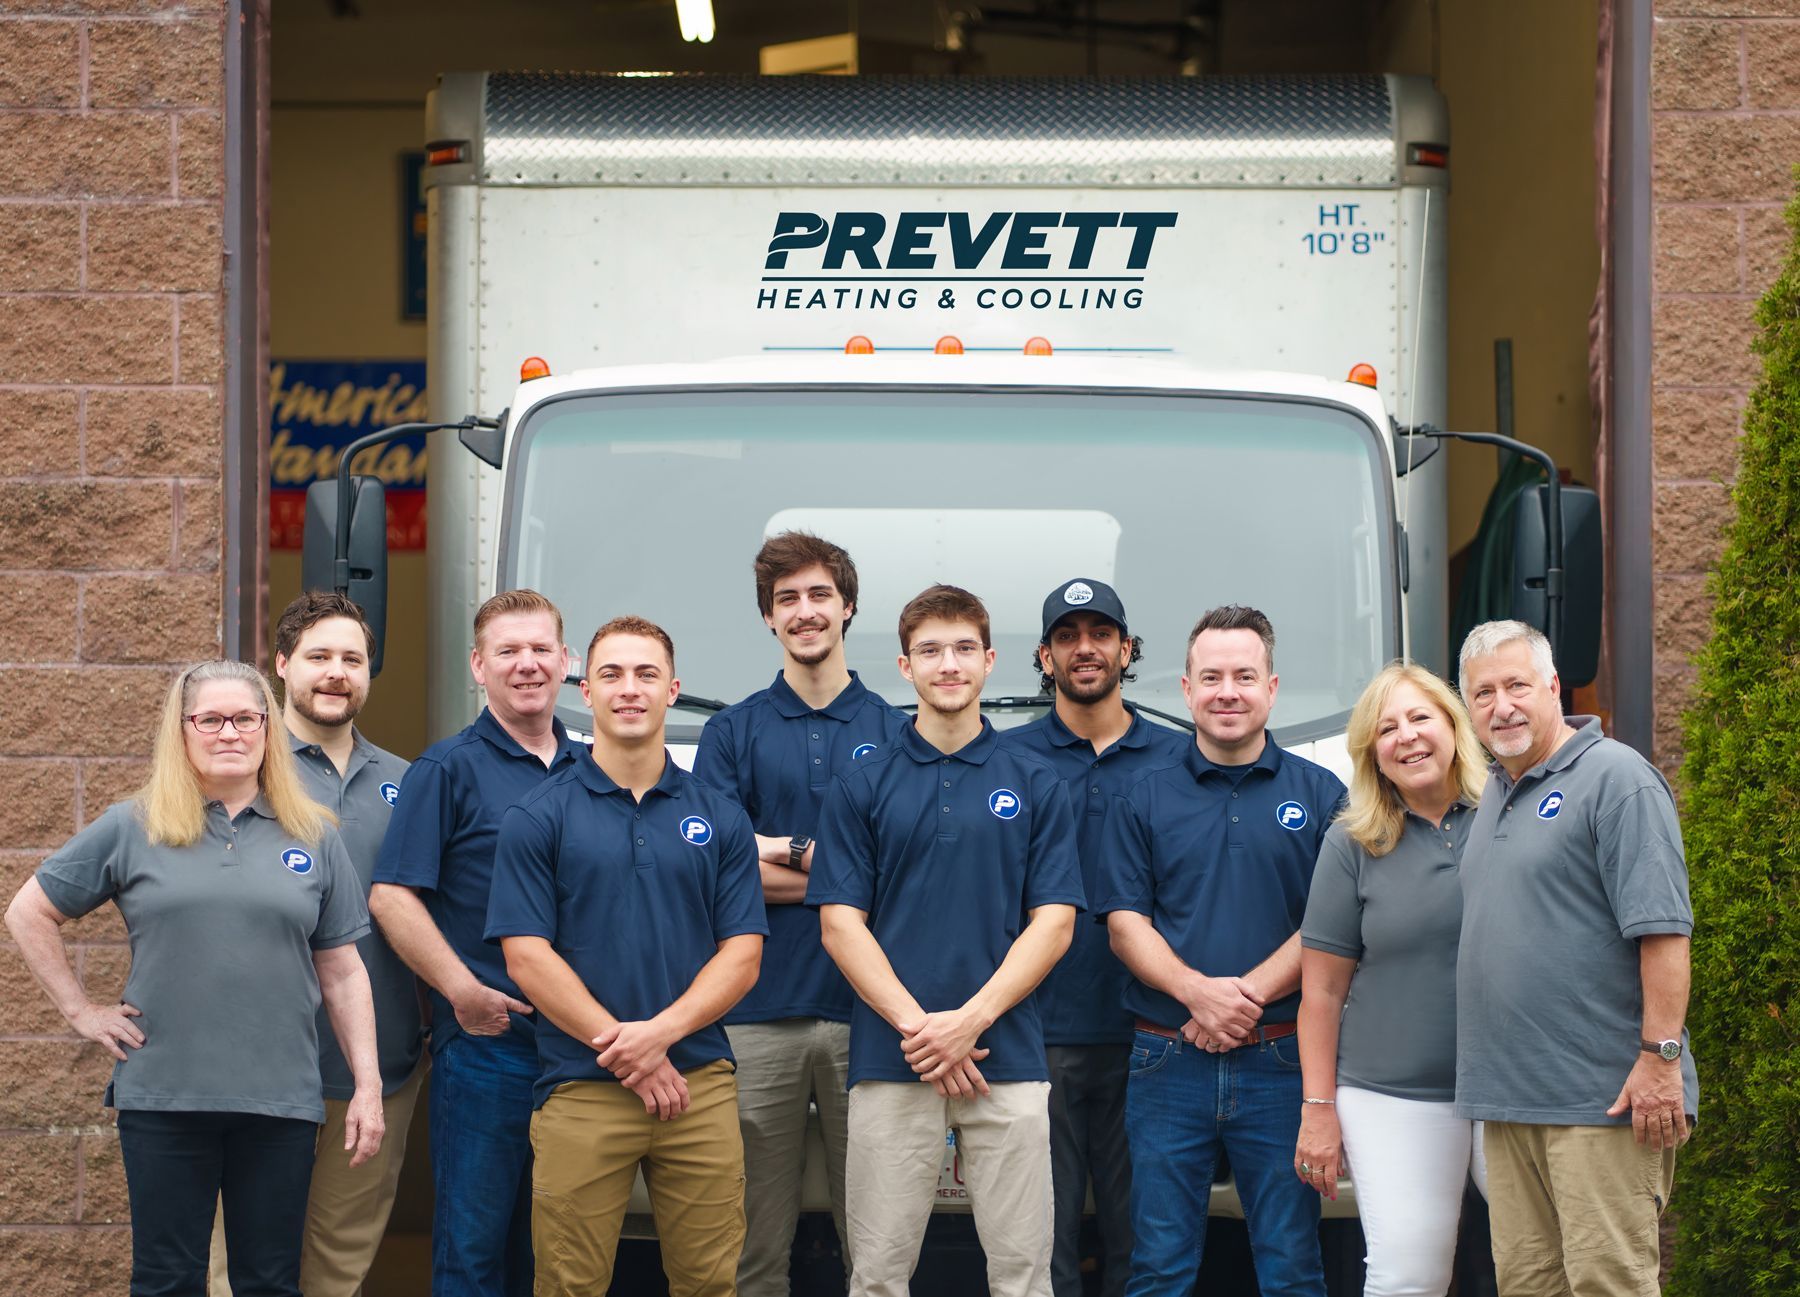 Prevett Team posing for a picture in front of a truck.